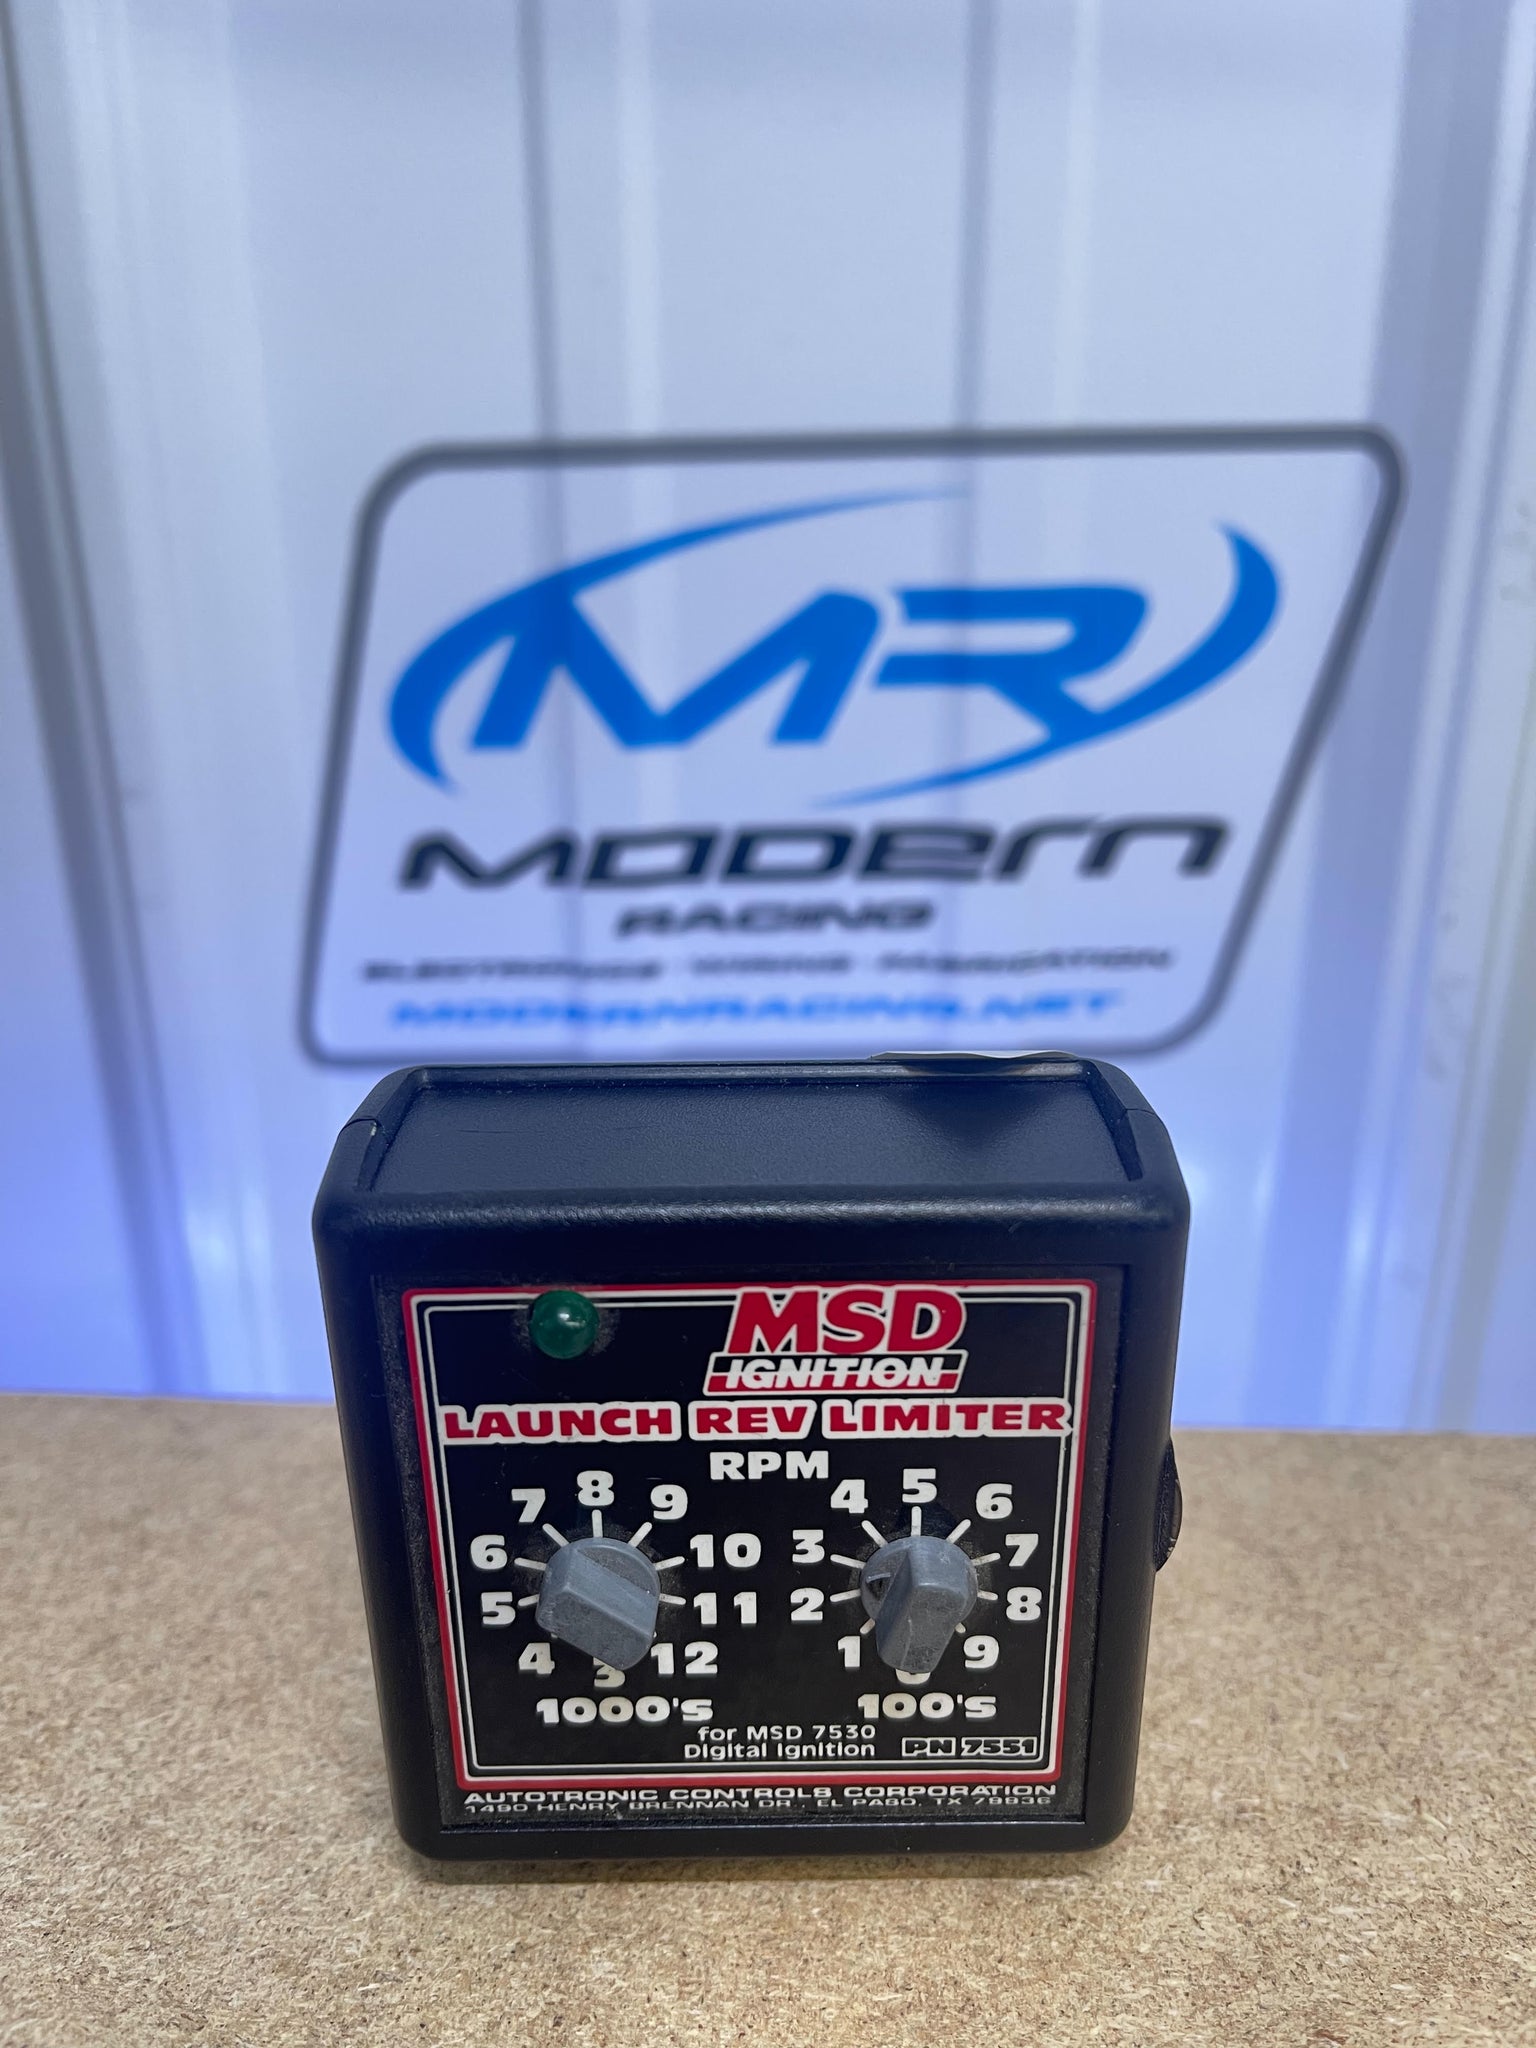 MSD Ignition Launch Rev Limiter